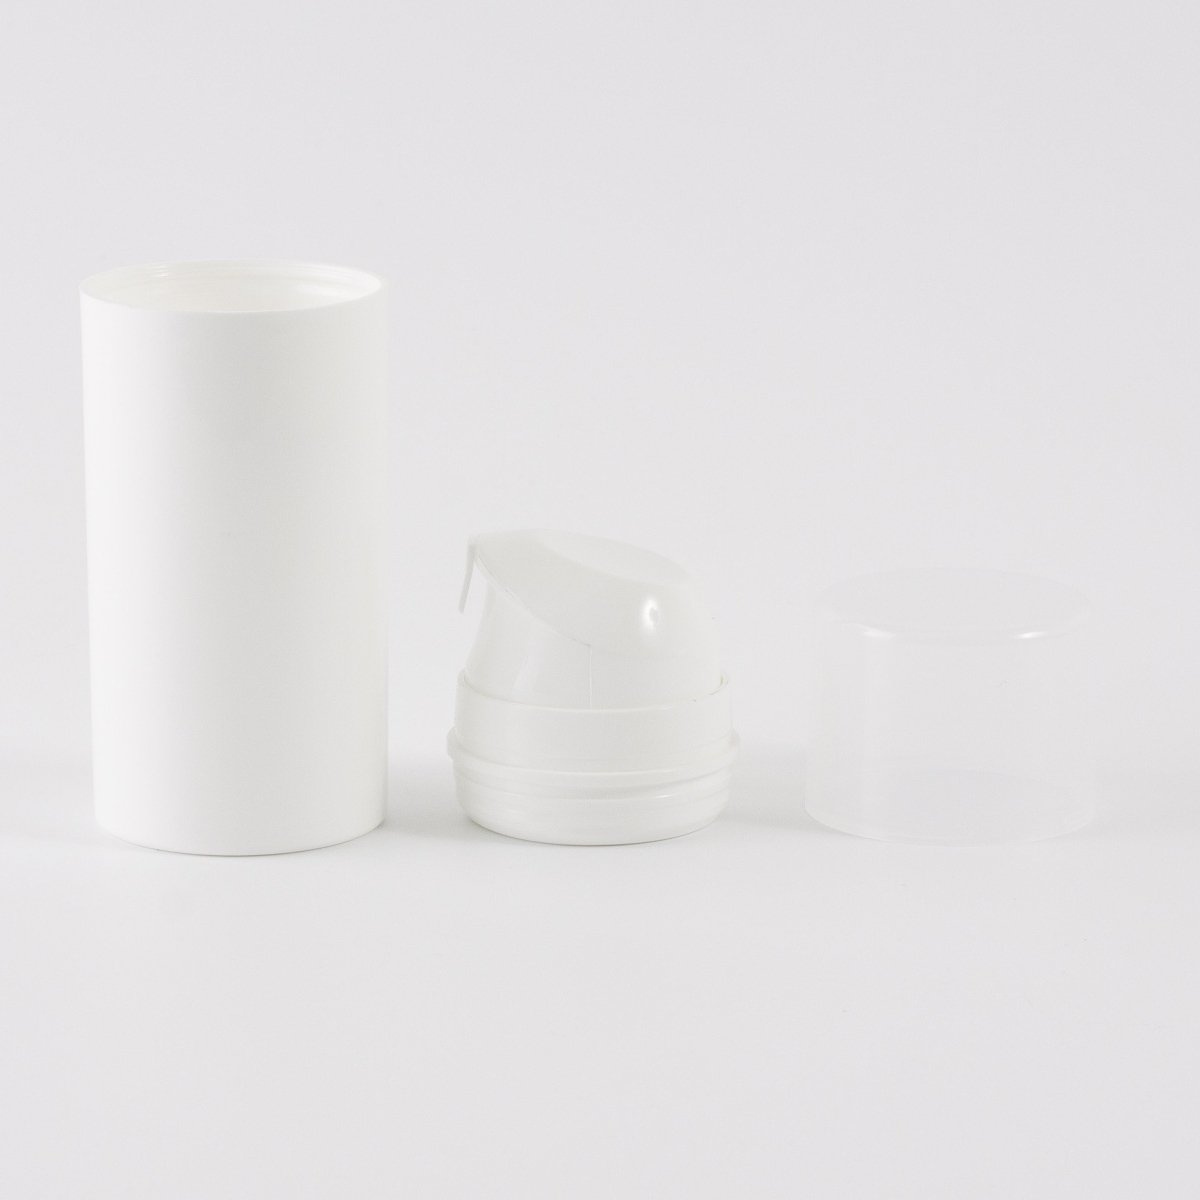 Penguin White 100ml - Airless bottles (with cap) - Mystic Moments UK